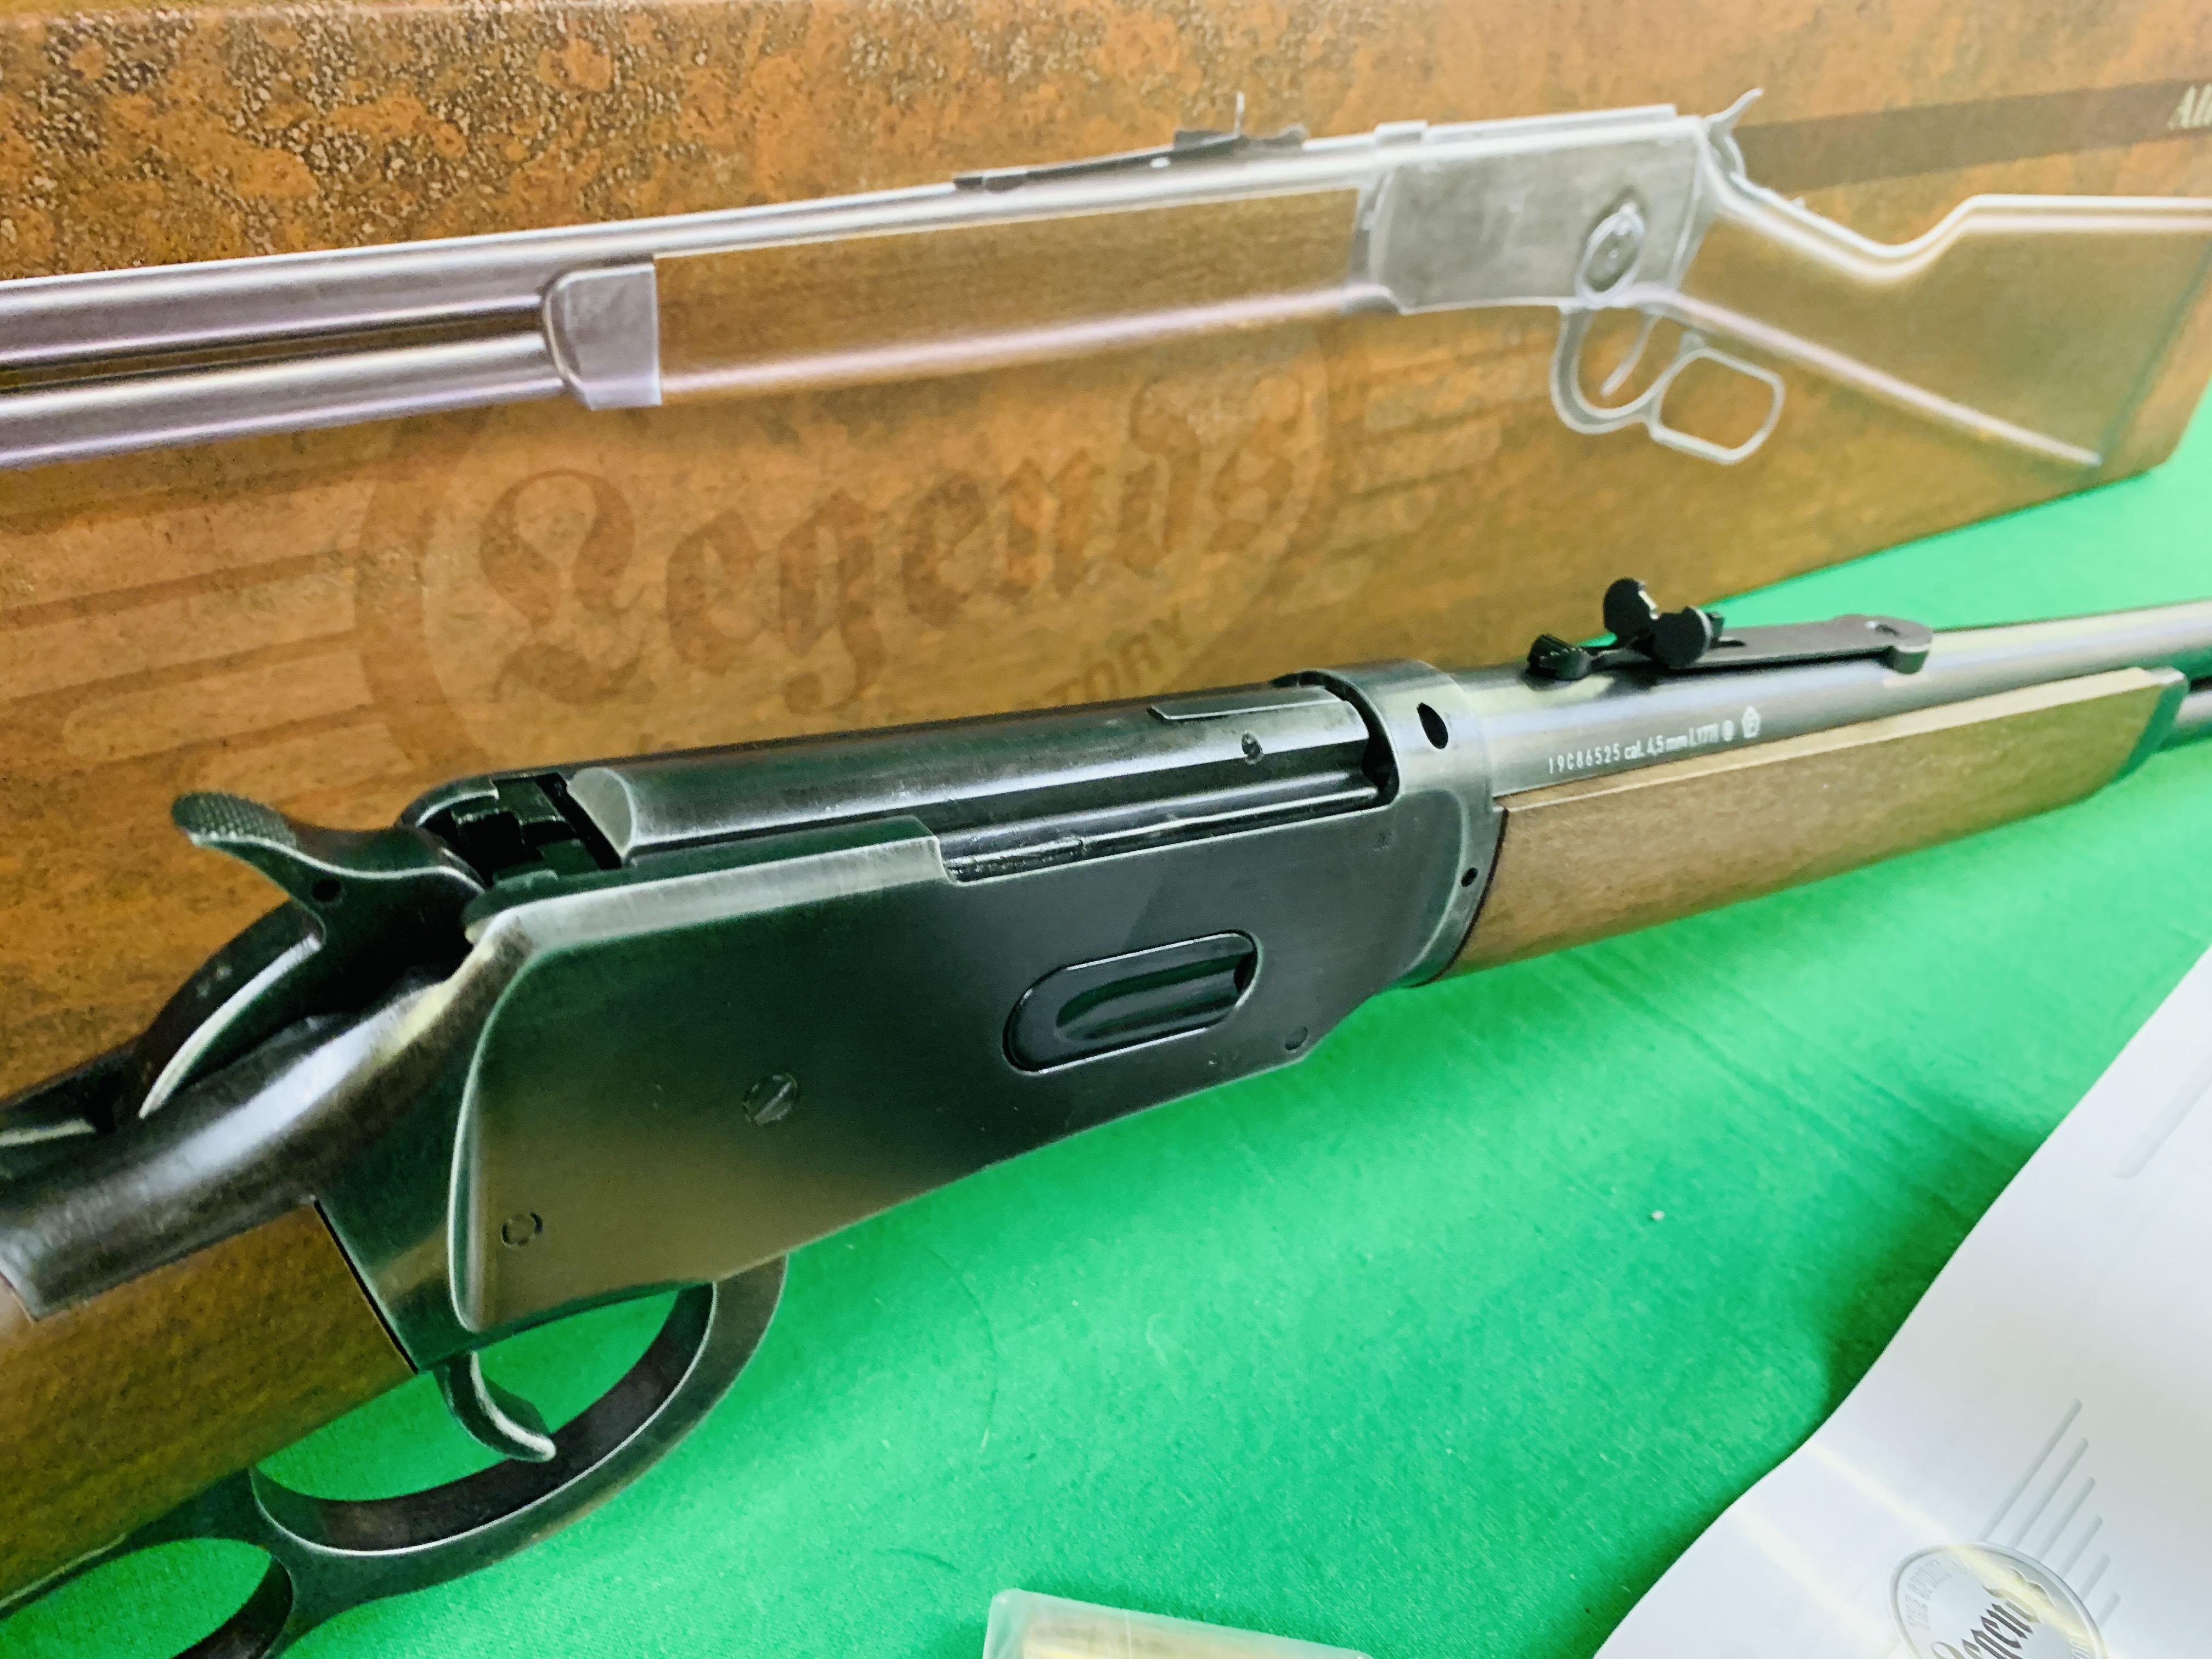 A UMAREX LEGENDS COWBOY RIFLE CO² AIR GUN 10 ROUND CAPACITY LEVER ACTION BOXED AS NEW - (ALL GUNS - Image 2 of 9